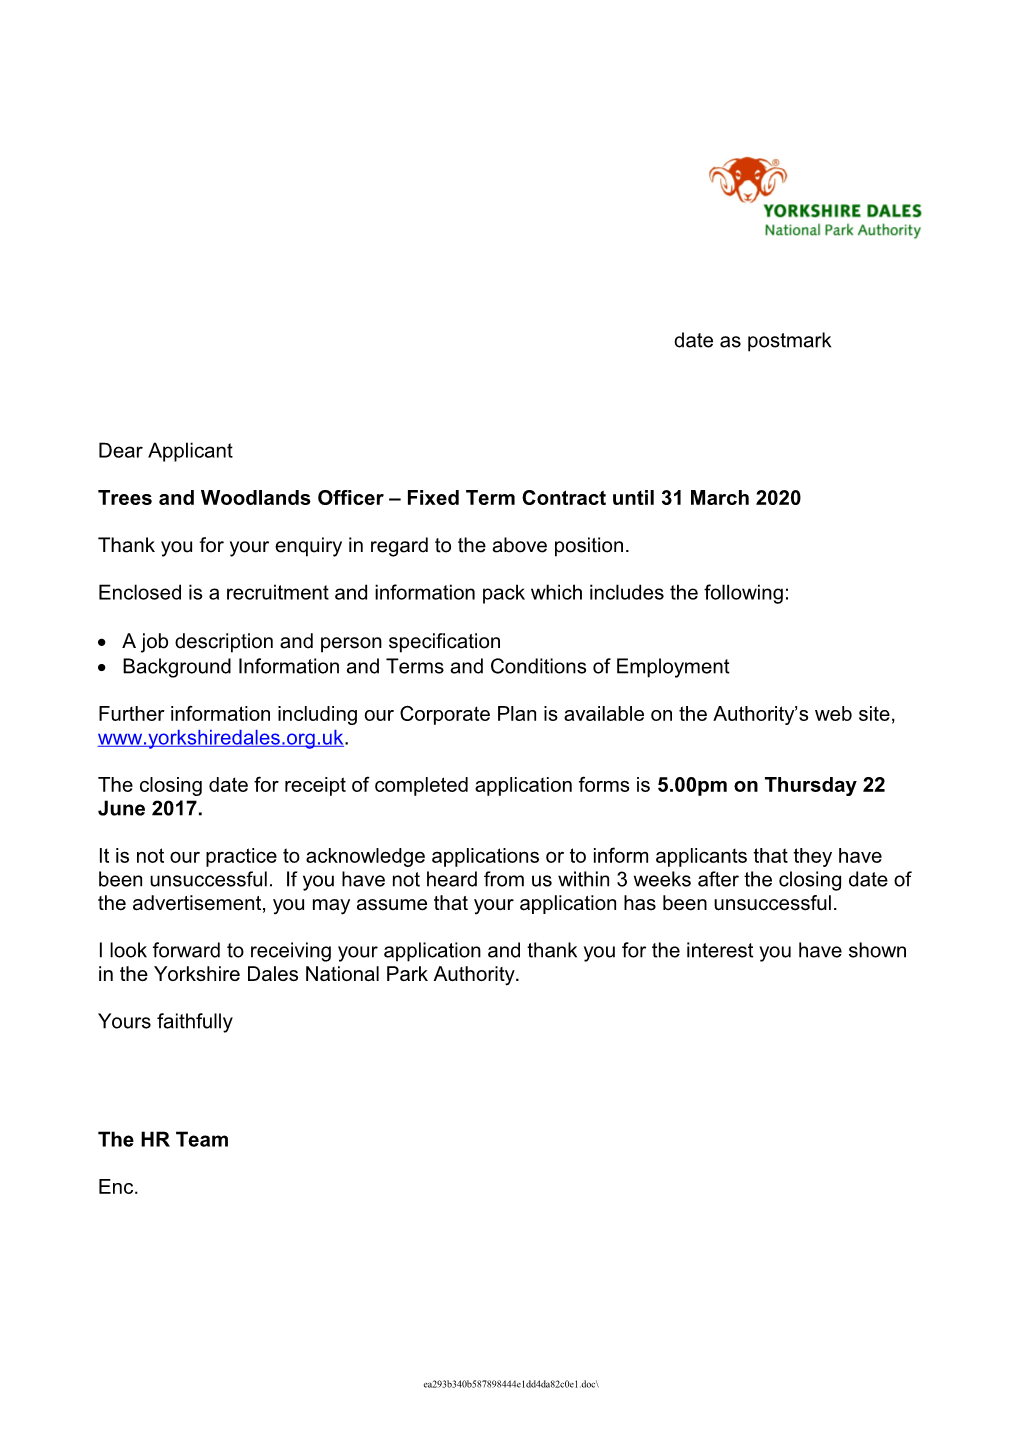 Trees and Woodlands Officer Fixed Term Contract Until 31 March 2020